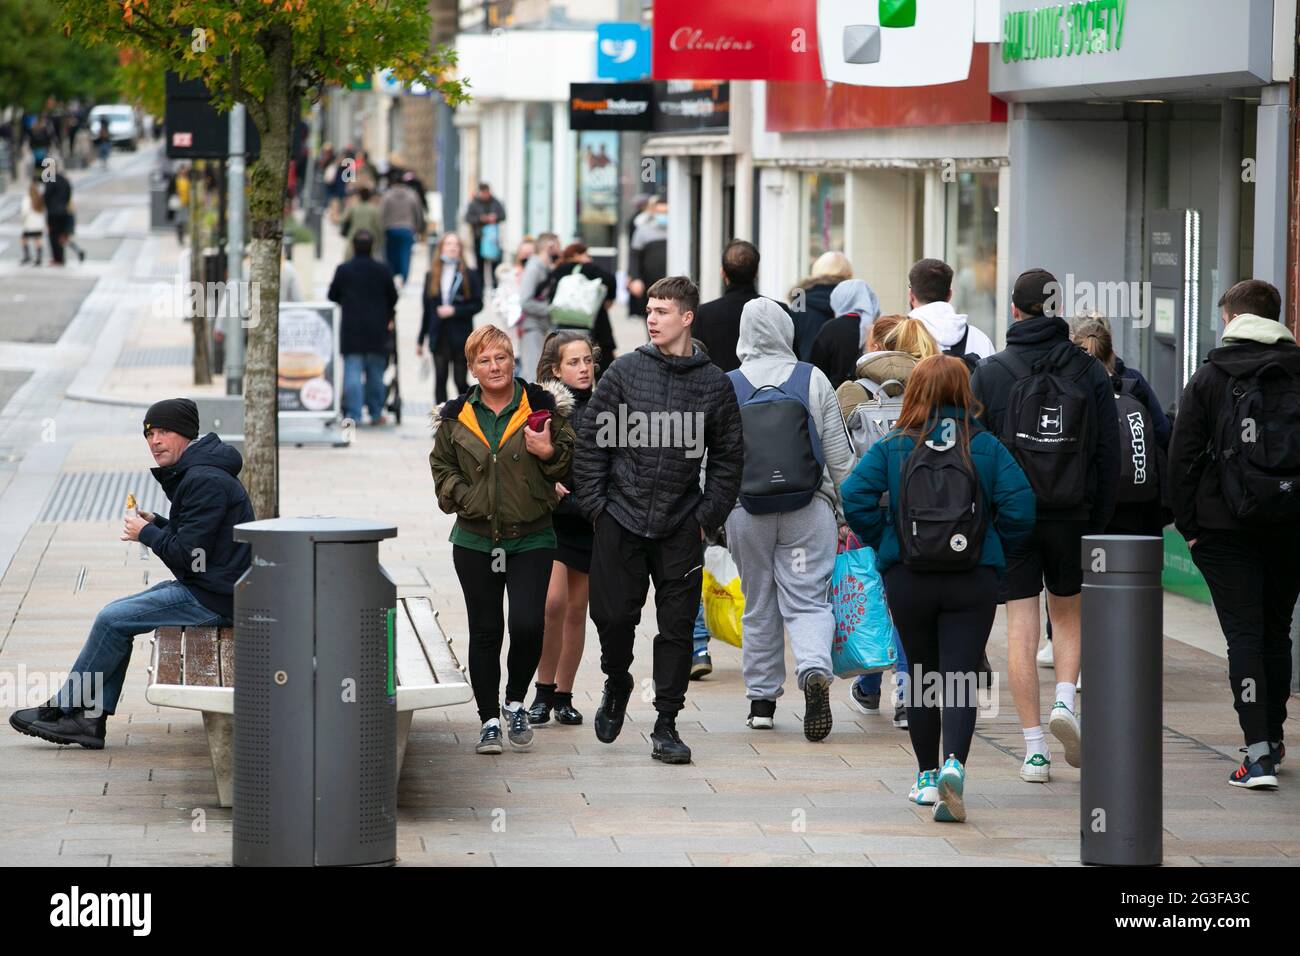 People in the city centre of Preston. Preston is a city in Lancashire in the north of England which like most areas in the north west of England is su Stock Photo